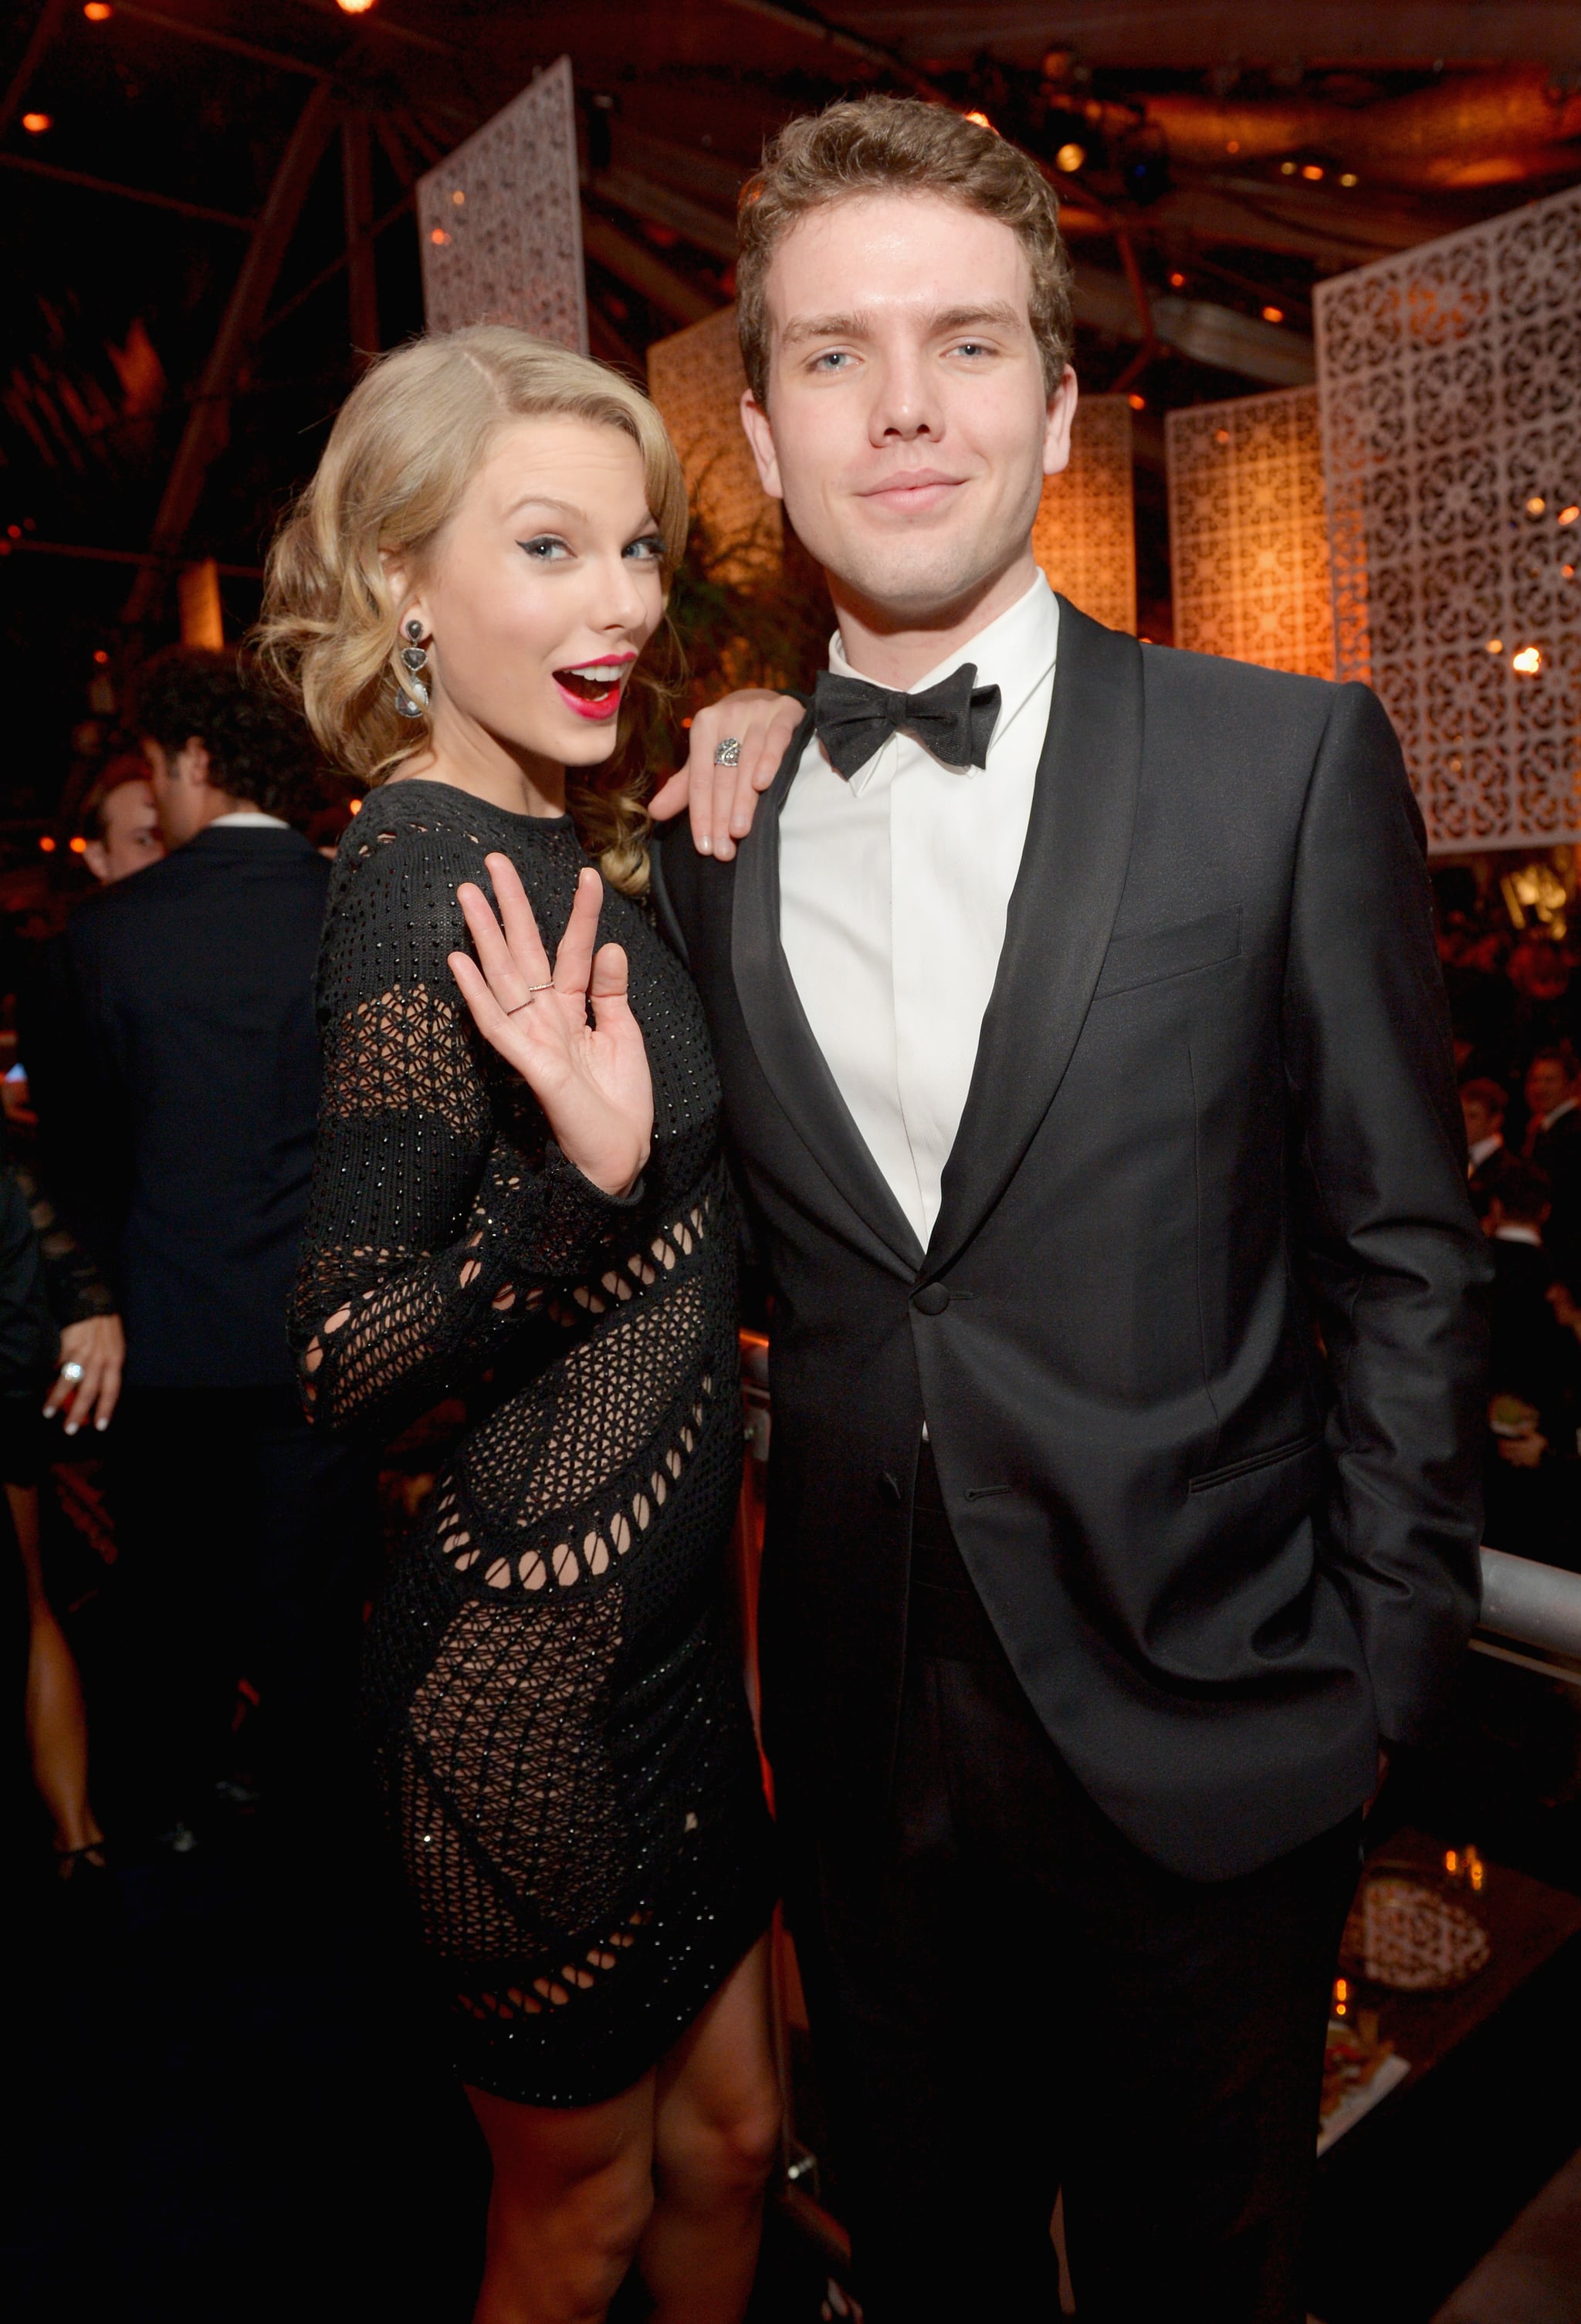 BEVERLY HILLS, CA - JANUARY 12: Singer Taylor Swift (L) and Austin Swift attend The Weinstein Company & Netflix's 2014 Golden Globes After Party presented by Bombardier, FIJI Water, Lexus, Laura Mercier, Marie Claire and Yucaipa Films at The Beverly Hilton Hotel on January 12, 2014 in Beverly Hills, California.  (Photo by Charley Gallay/Getty Images for The Weinstein Company)